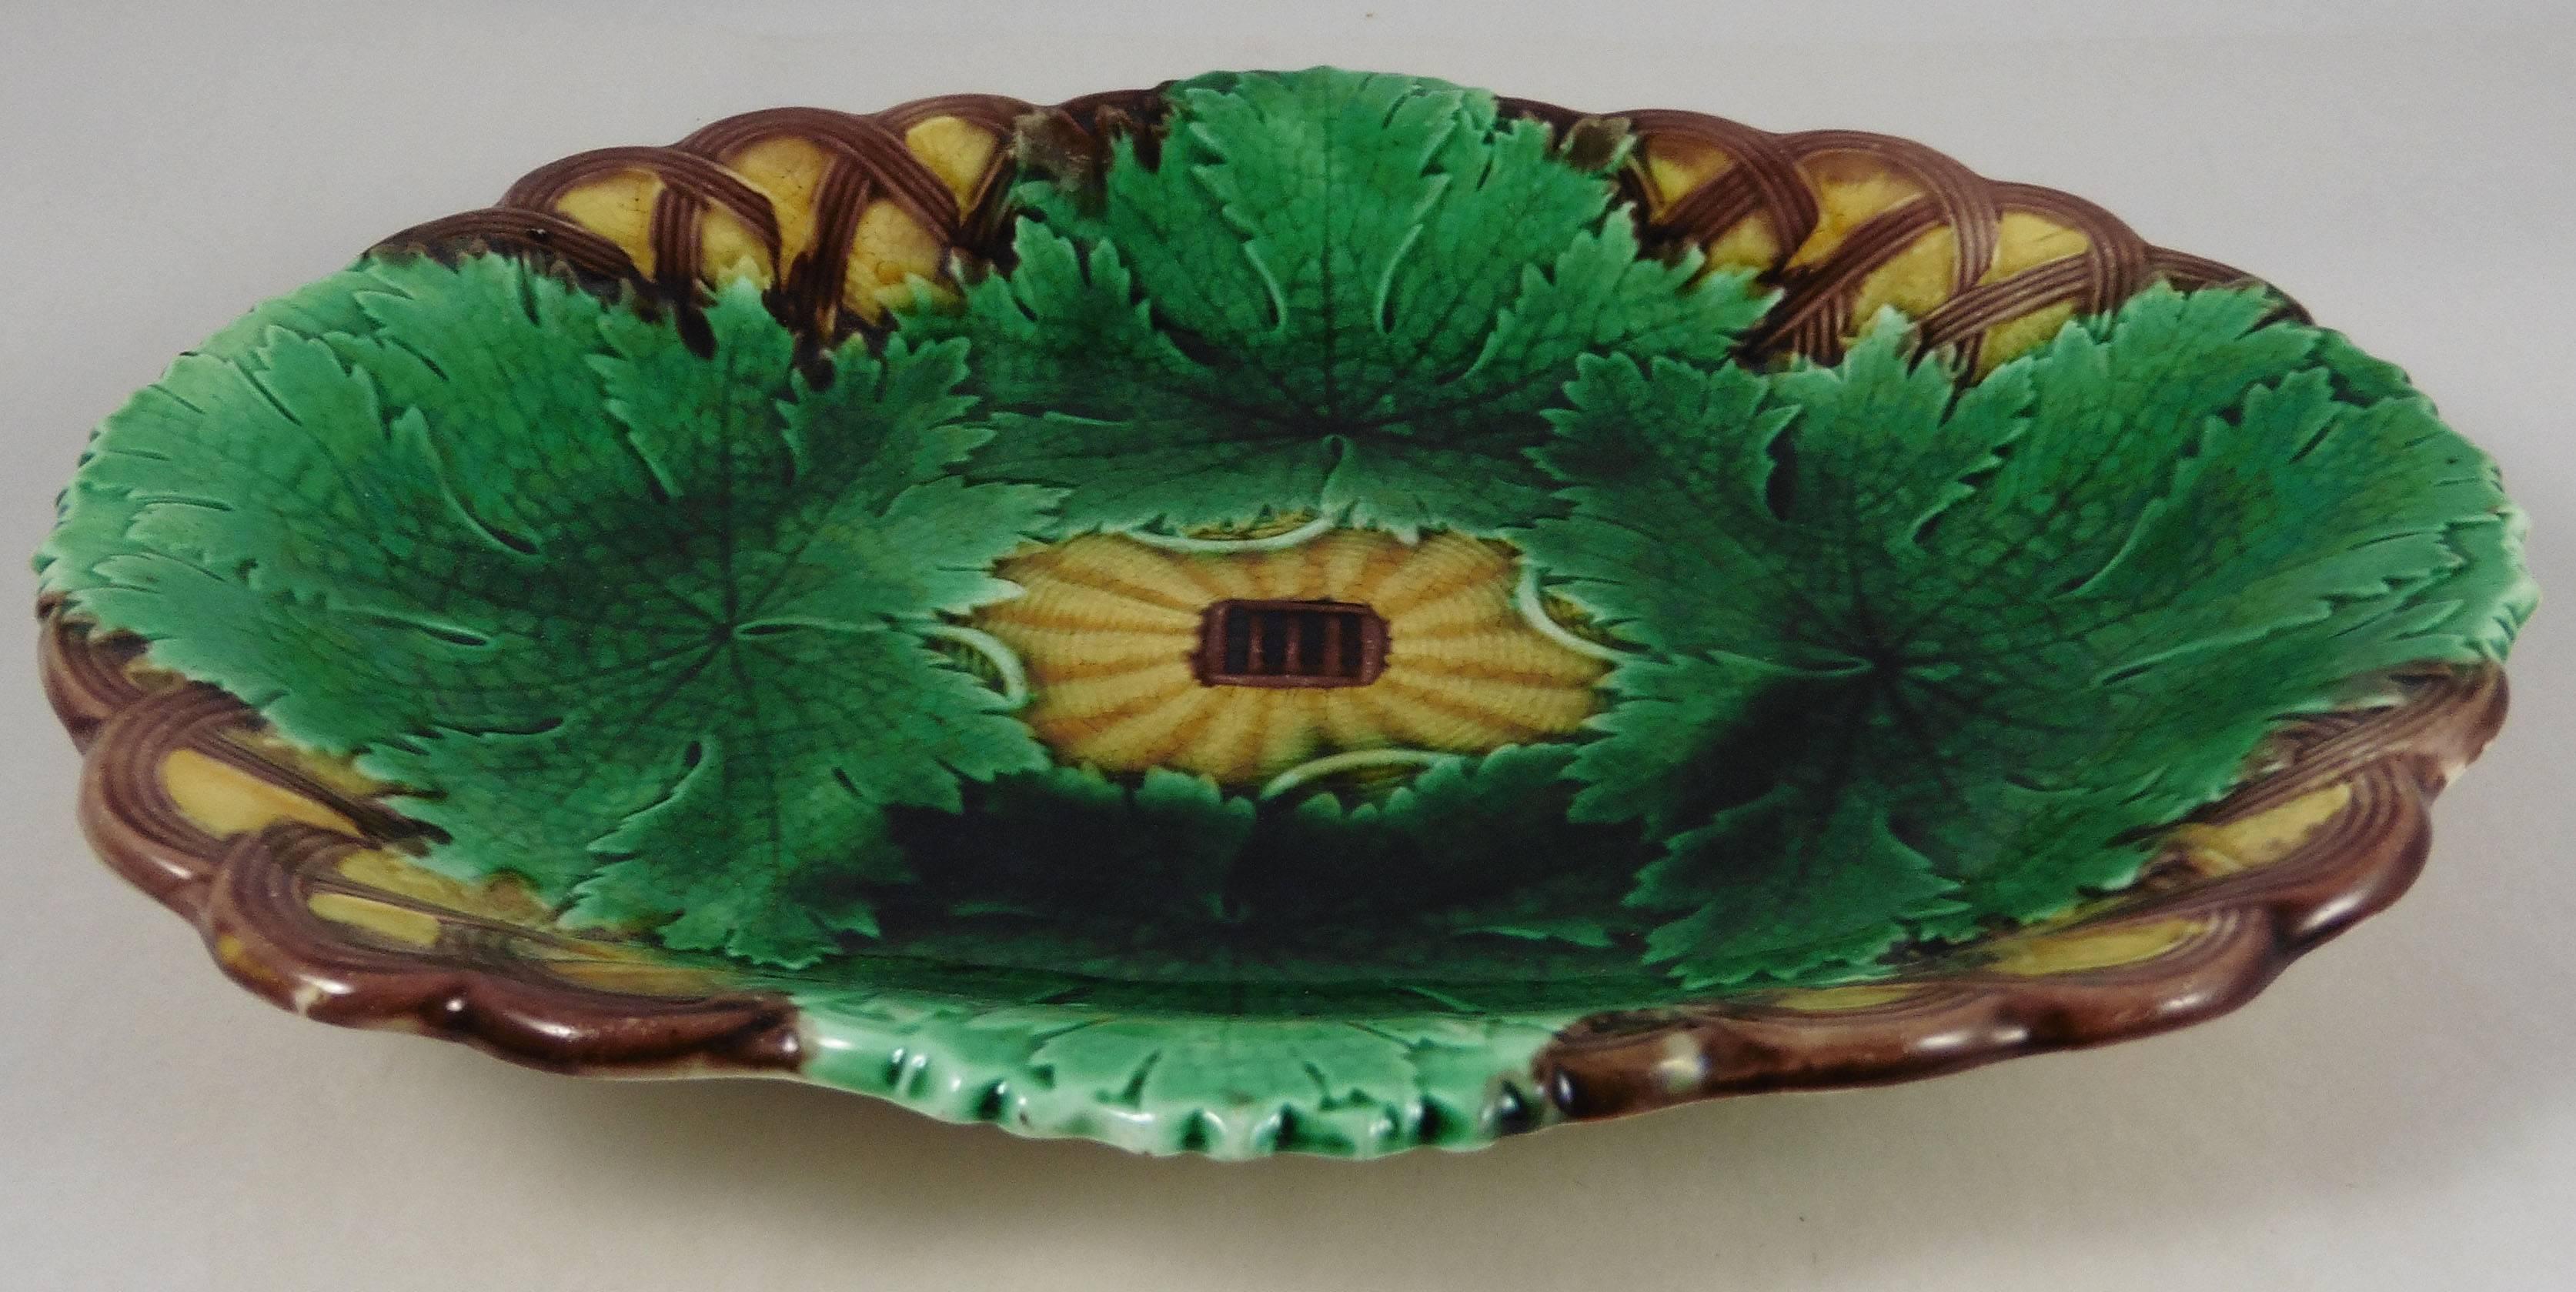 19th century Majolica leaves on a basketweave platter signed Wedgwood.